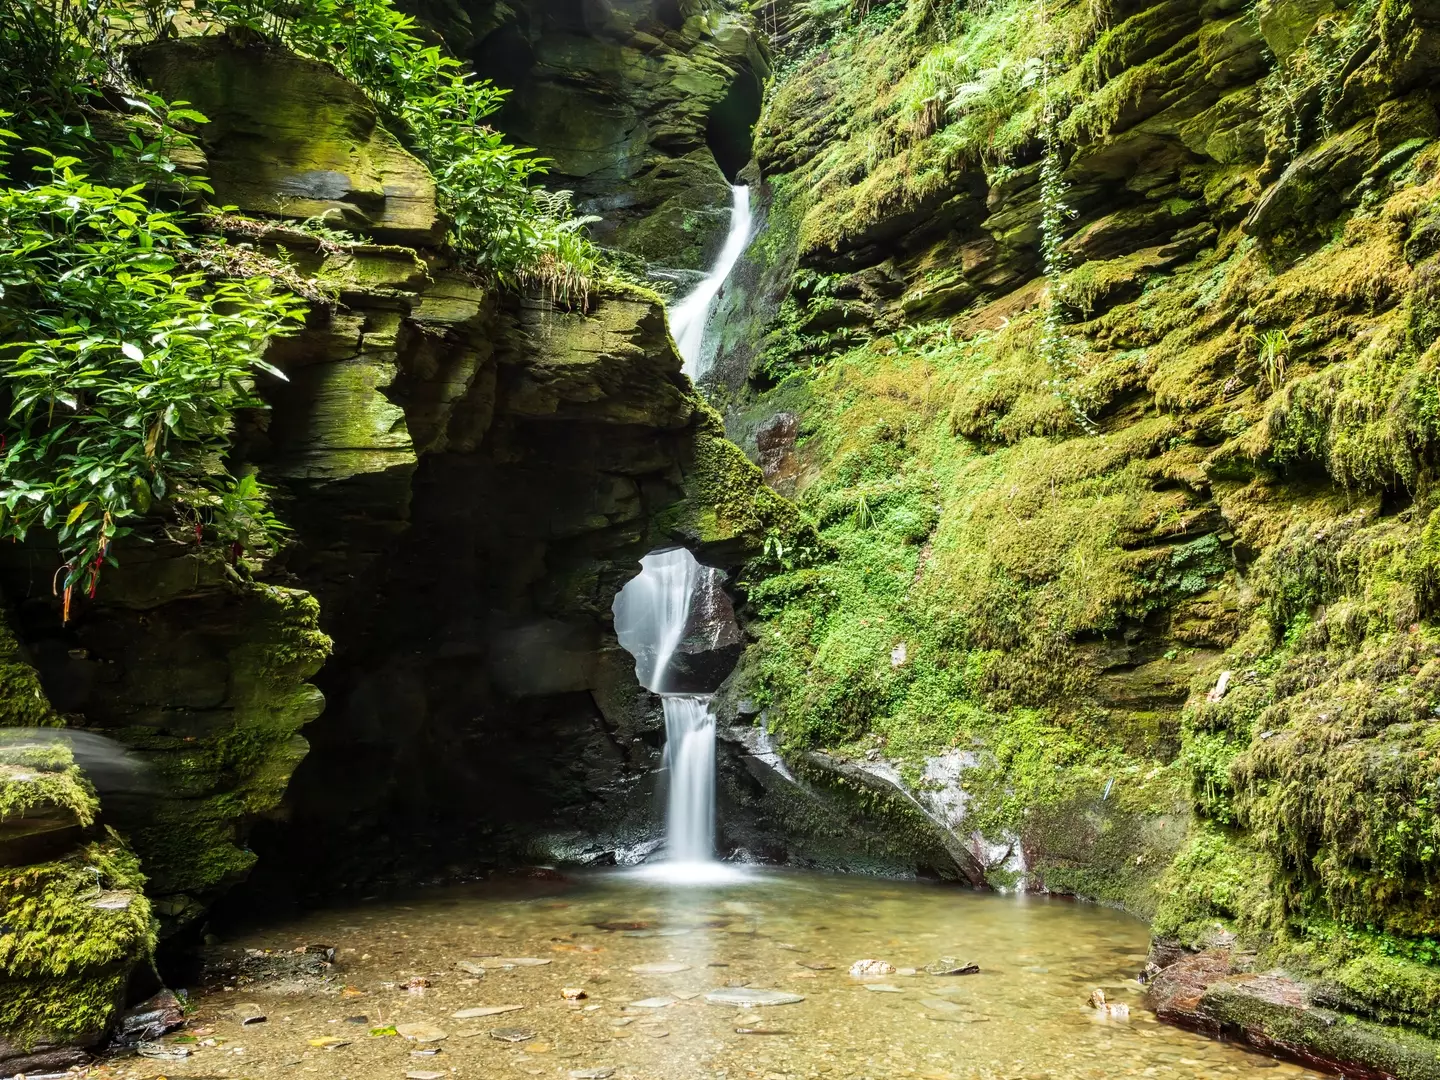 St Nectan's Glen in Cornwall is well and truly one of the UK's hidden gems.